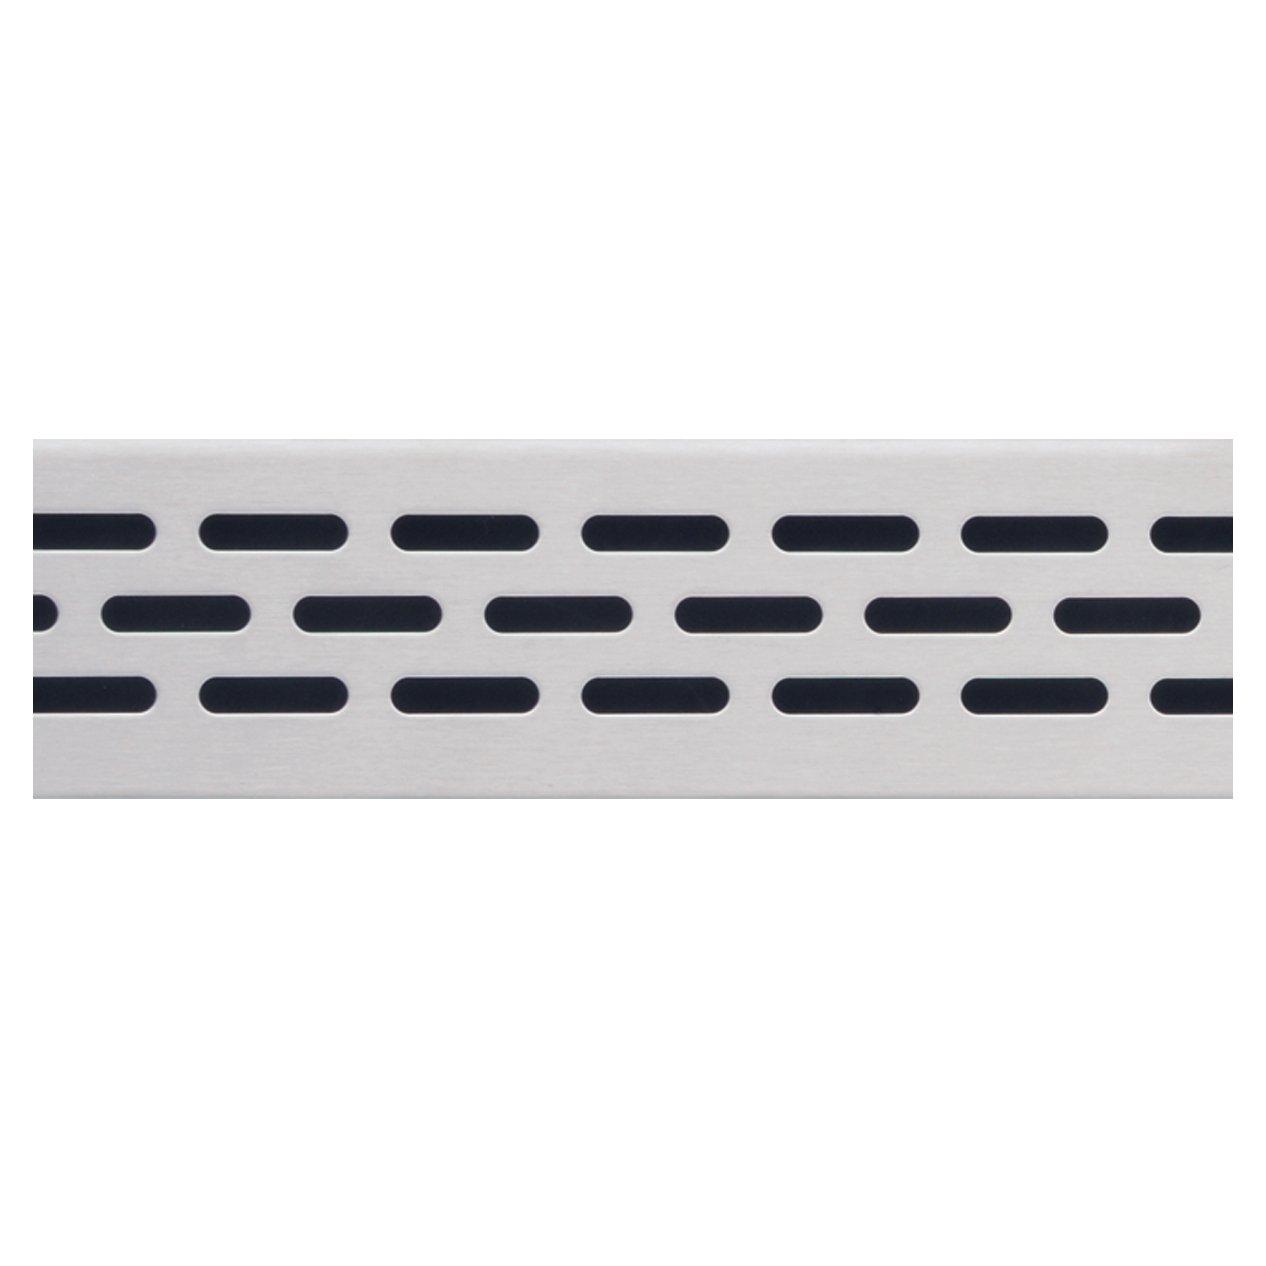 Compotite 24in. Oval Design Stainless Steel Linear Drain Grate